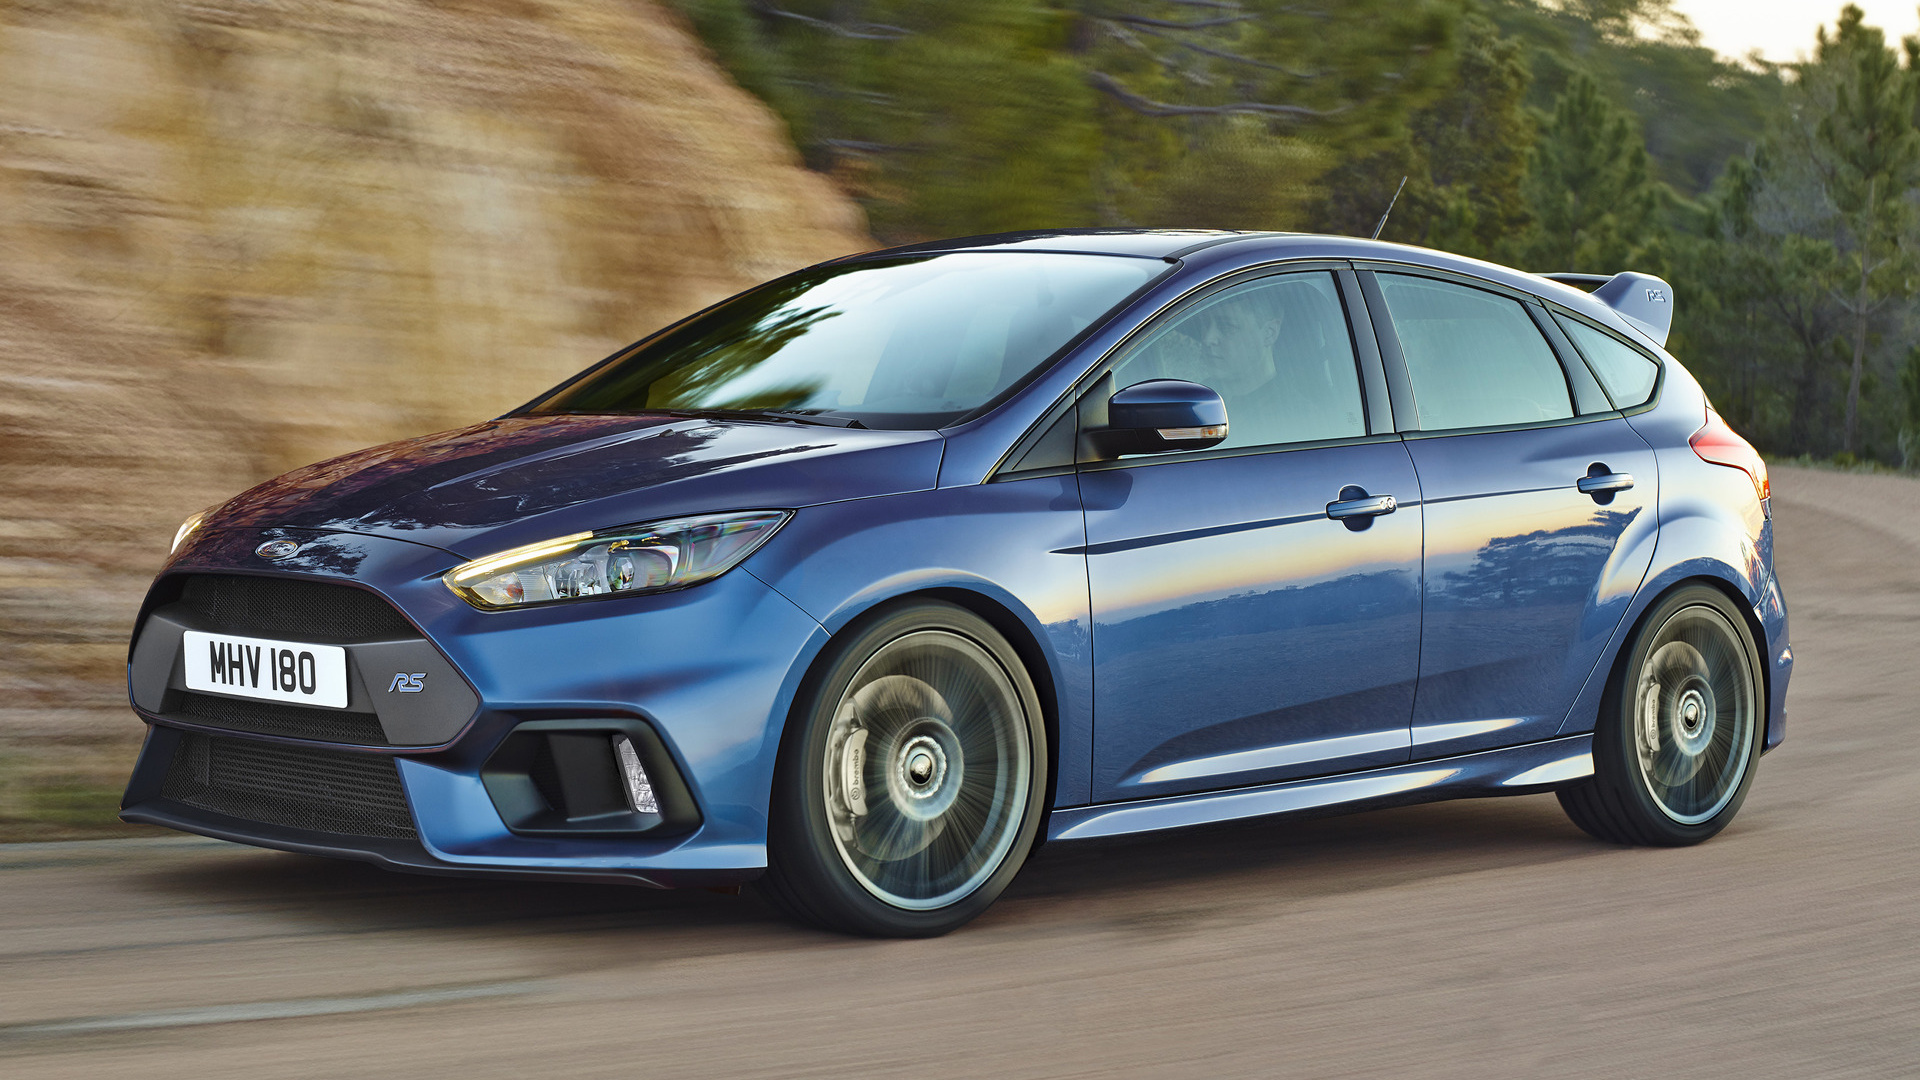 Ford Focus RS 2015 Wallpapers and HD Images